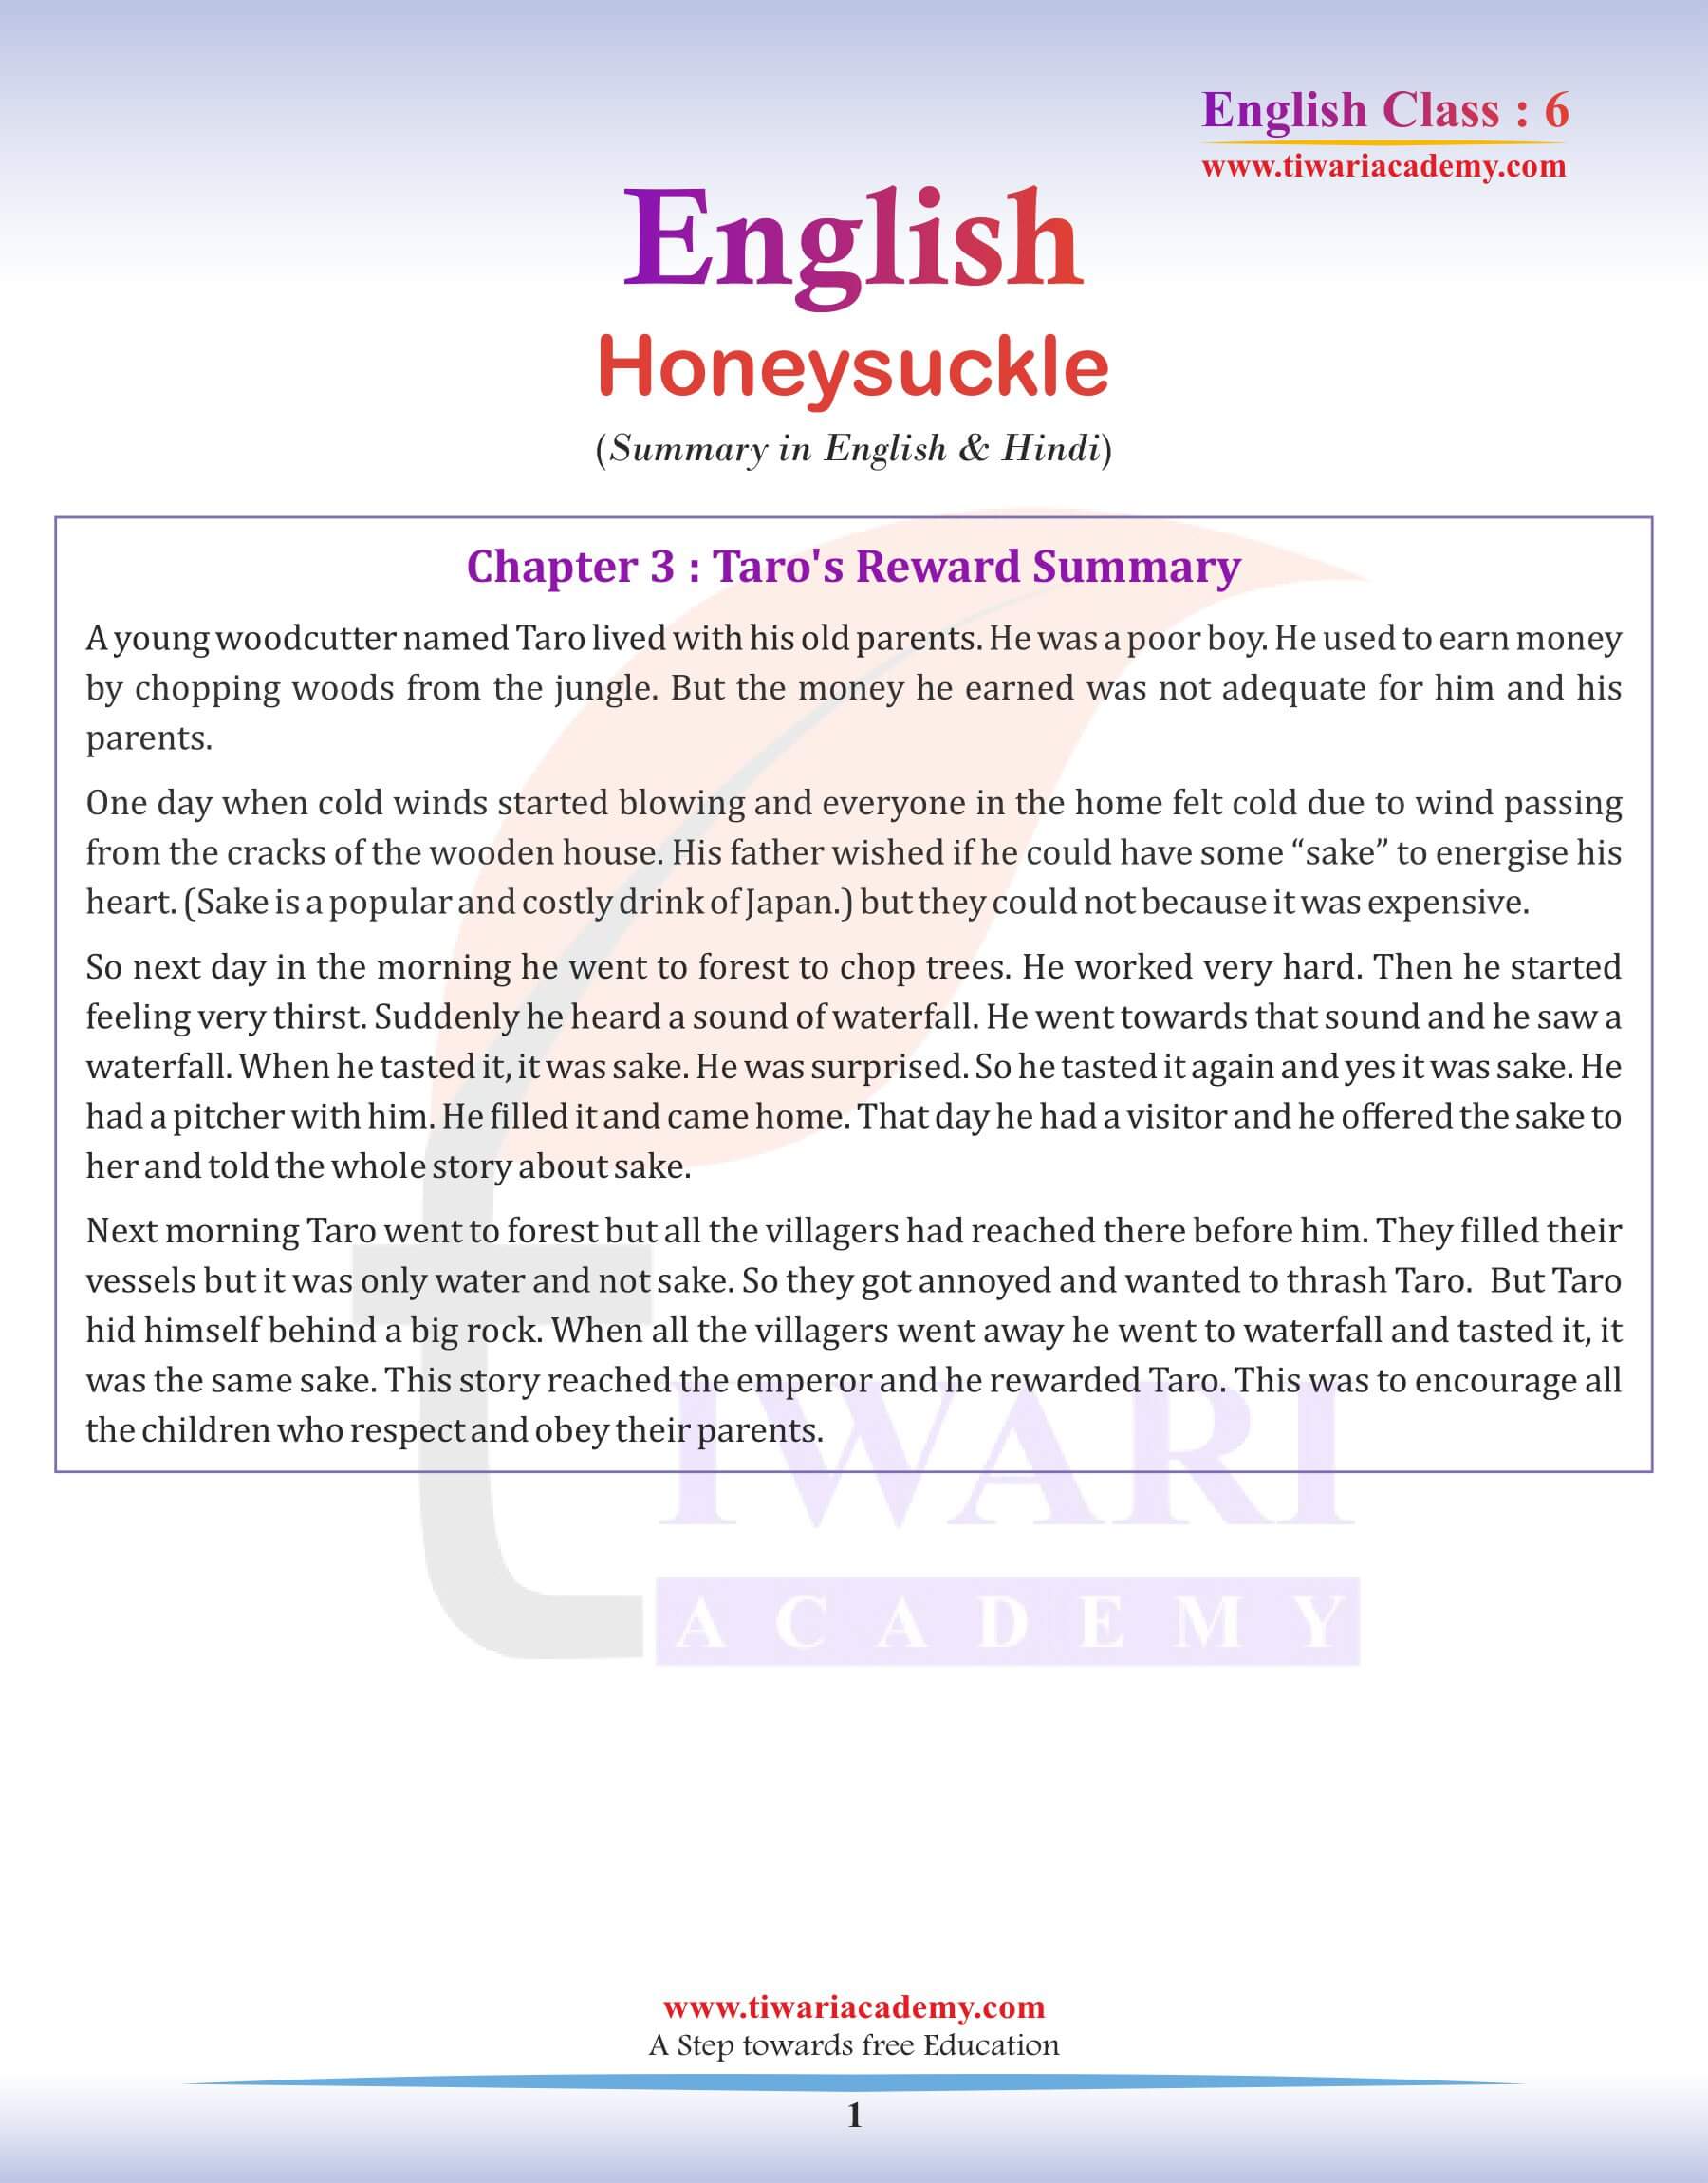 Class 6 English Chapter 3: Summary in English